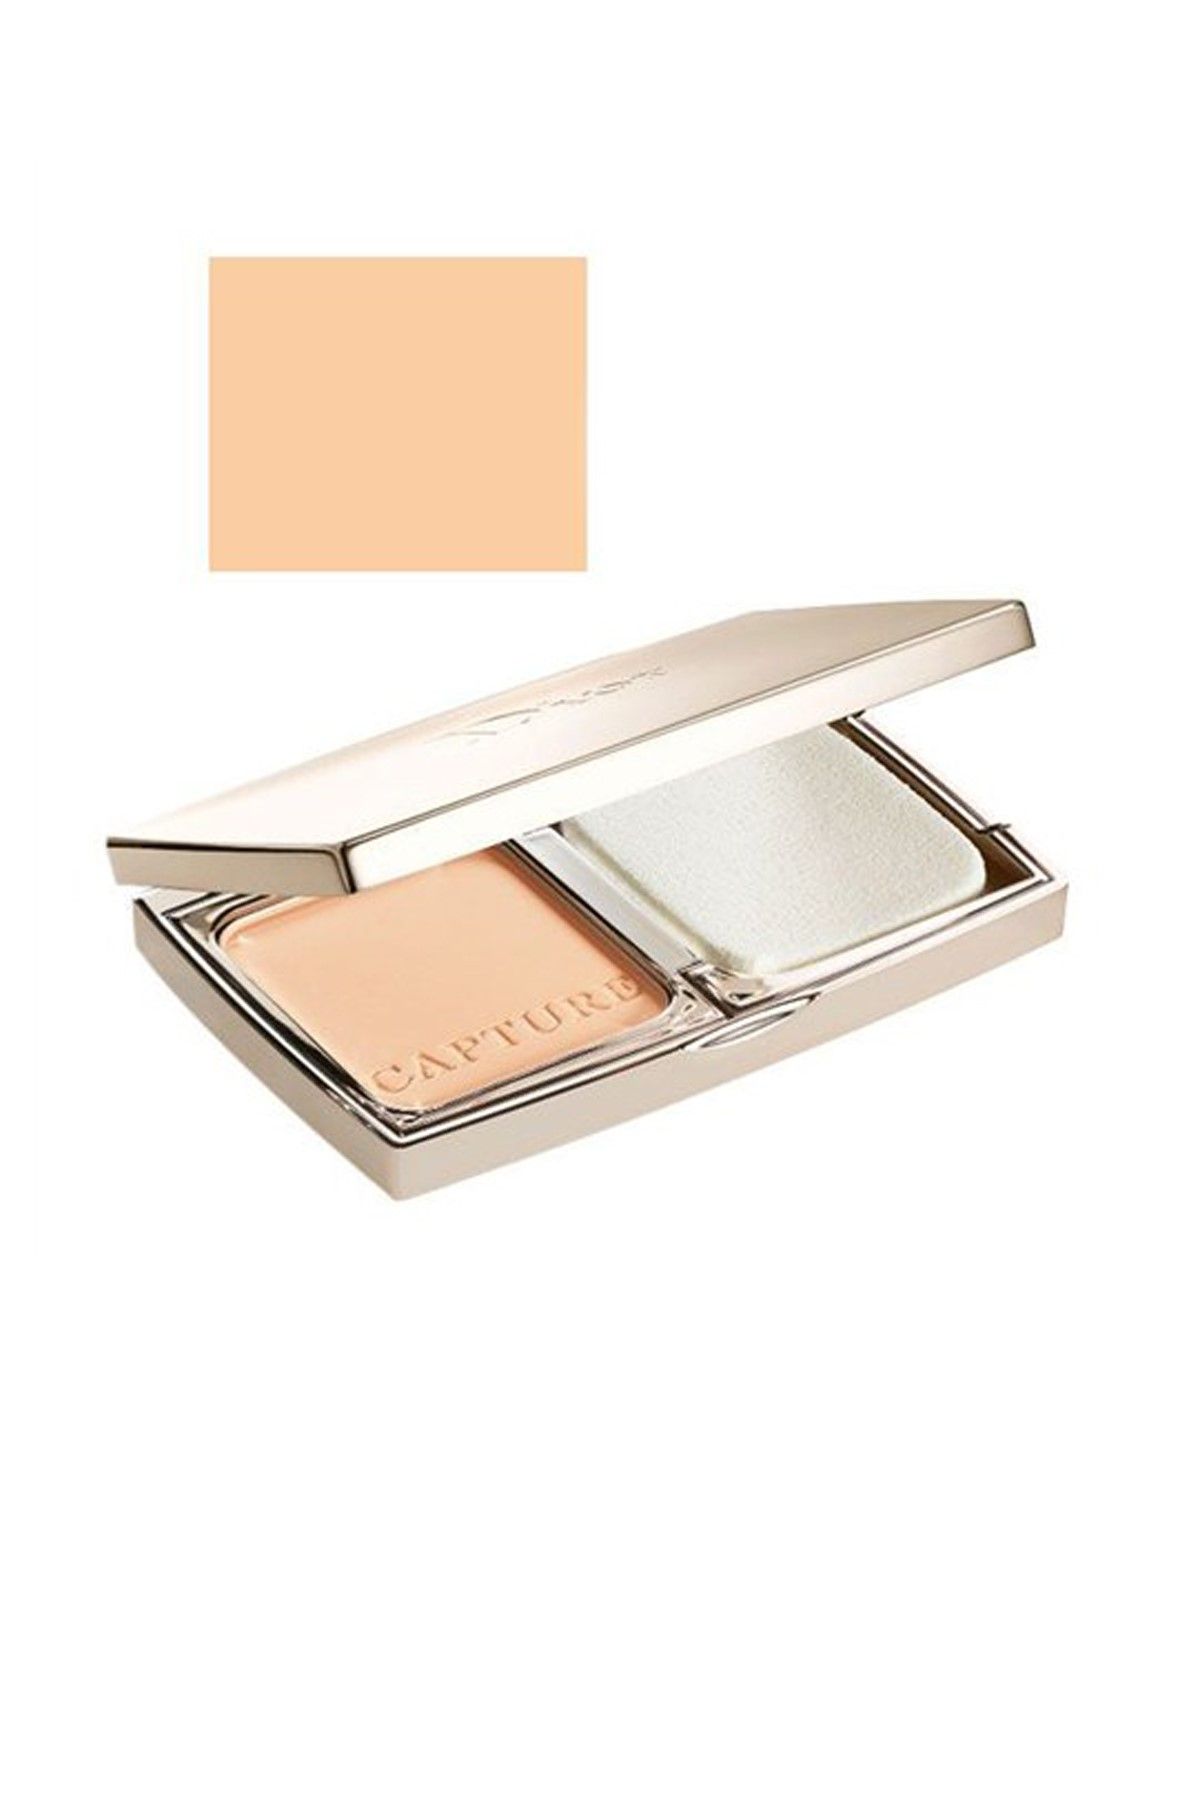 Dior Pudra - Capture Totale Compact Foundation 021 3348901181686